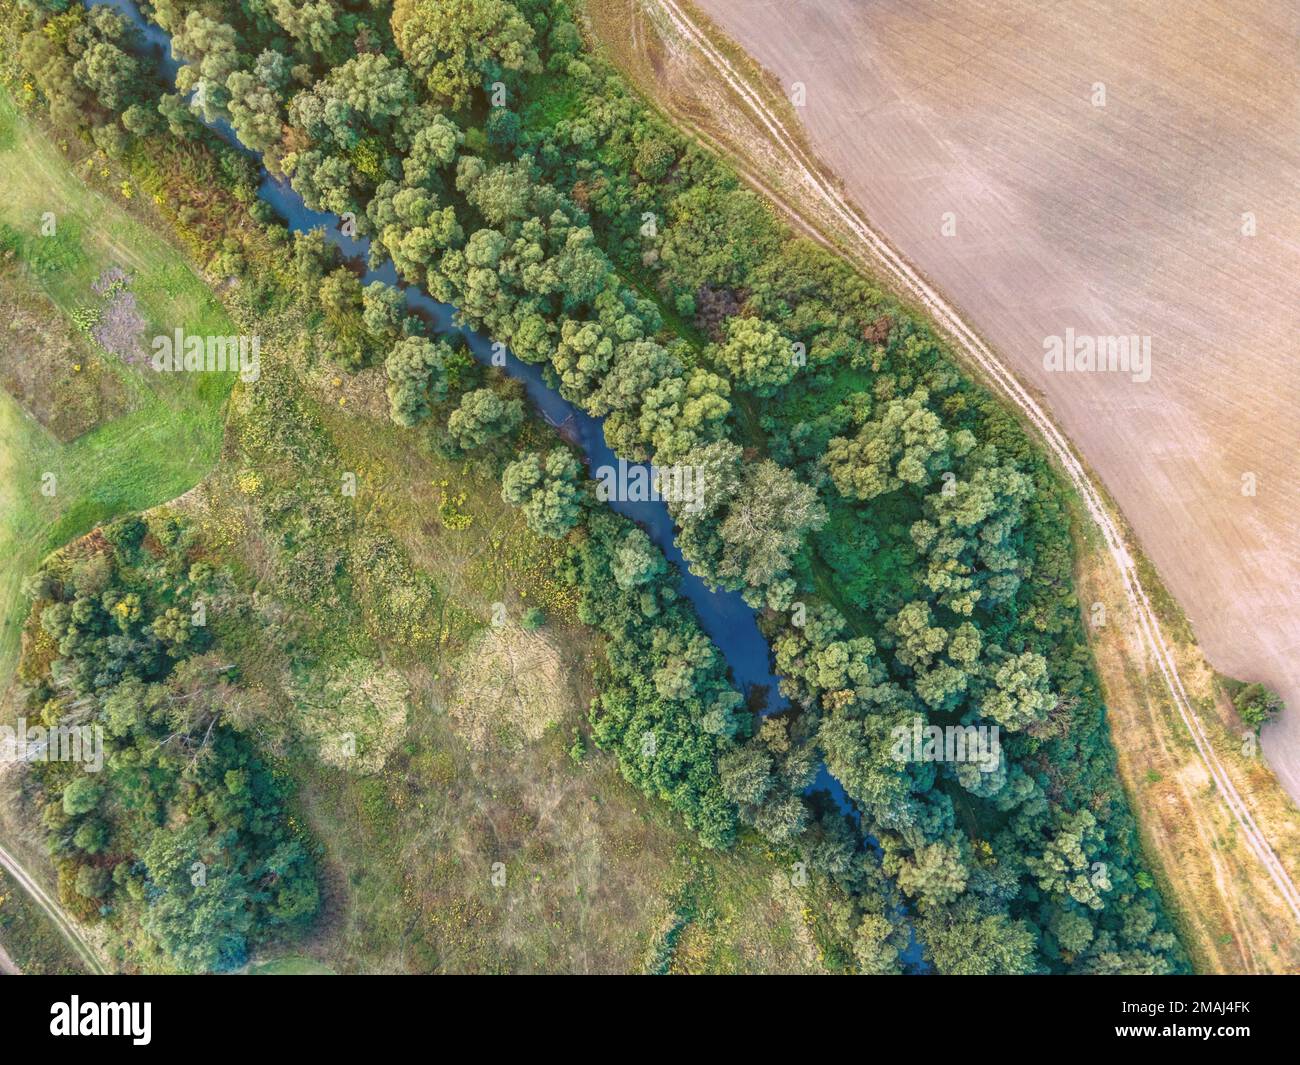 Aerial view of the Ipoly river on the Slovak-Hungarian border and the environment surrounding the river, Balassagyarmat, Hungary Stock Photo